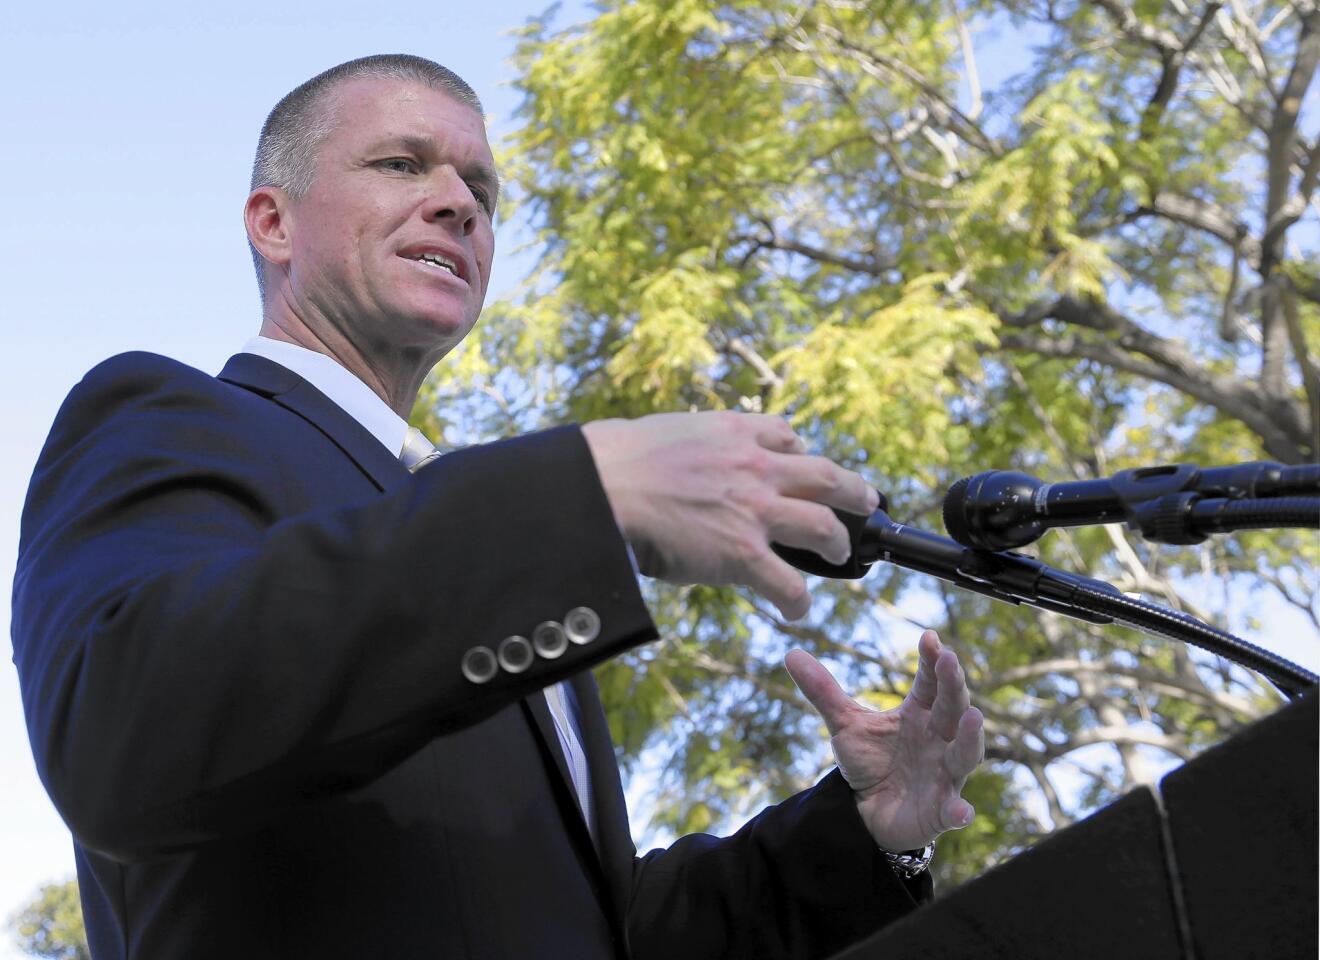 Orange County sheriff's Lt. Jeff Hallock speaks at a news conference Monday outside the Central Men's Jail in Santa Ana, where three inmates escaped Friday.